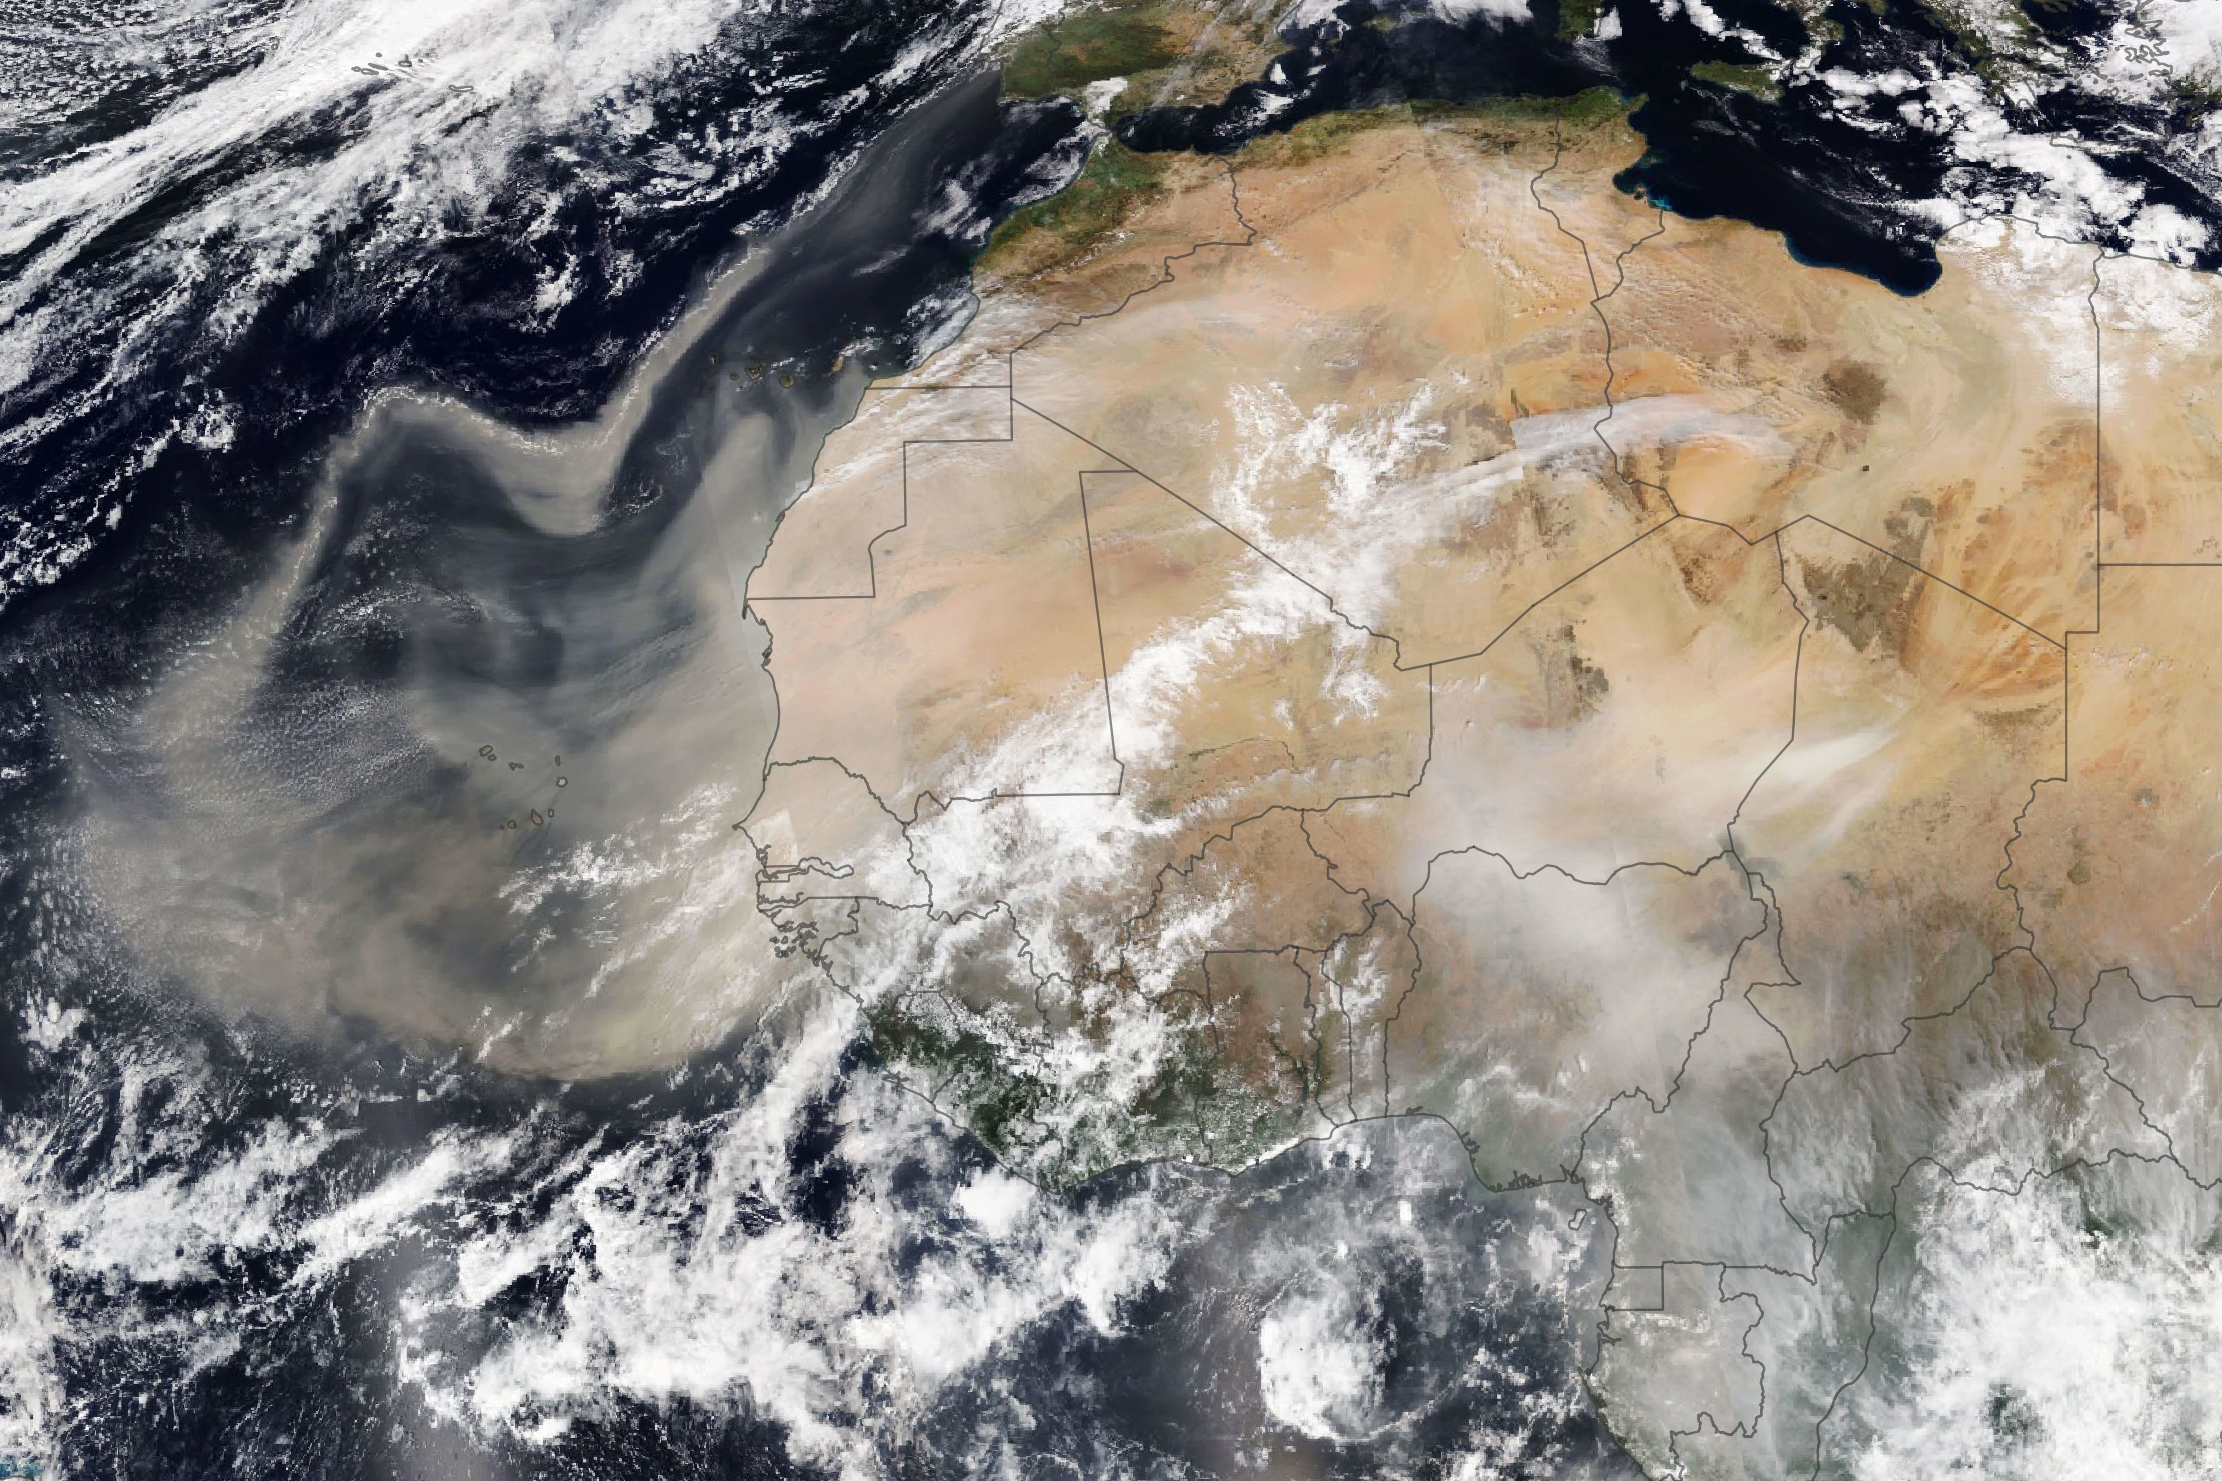 An image captured by the VIIRS instrument on the NOAA-20 satellite shows dust from the Saharan desert blowing west over the Atlantic